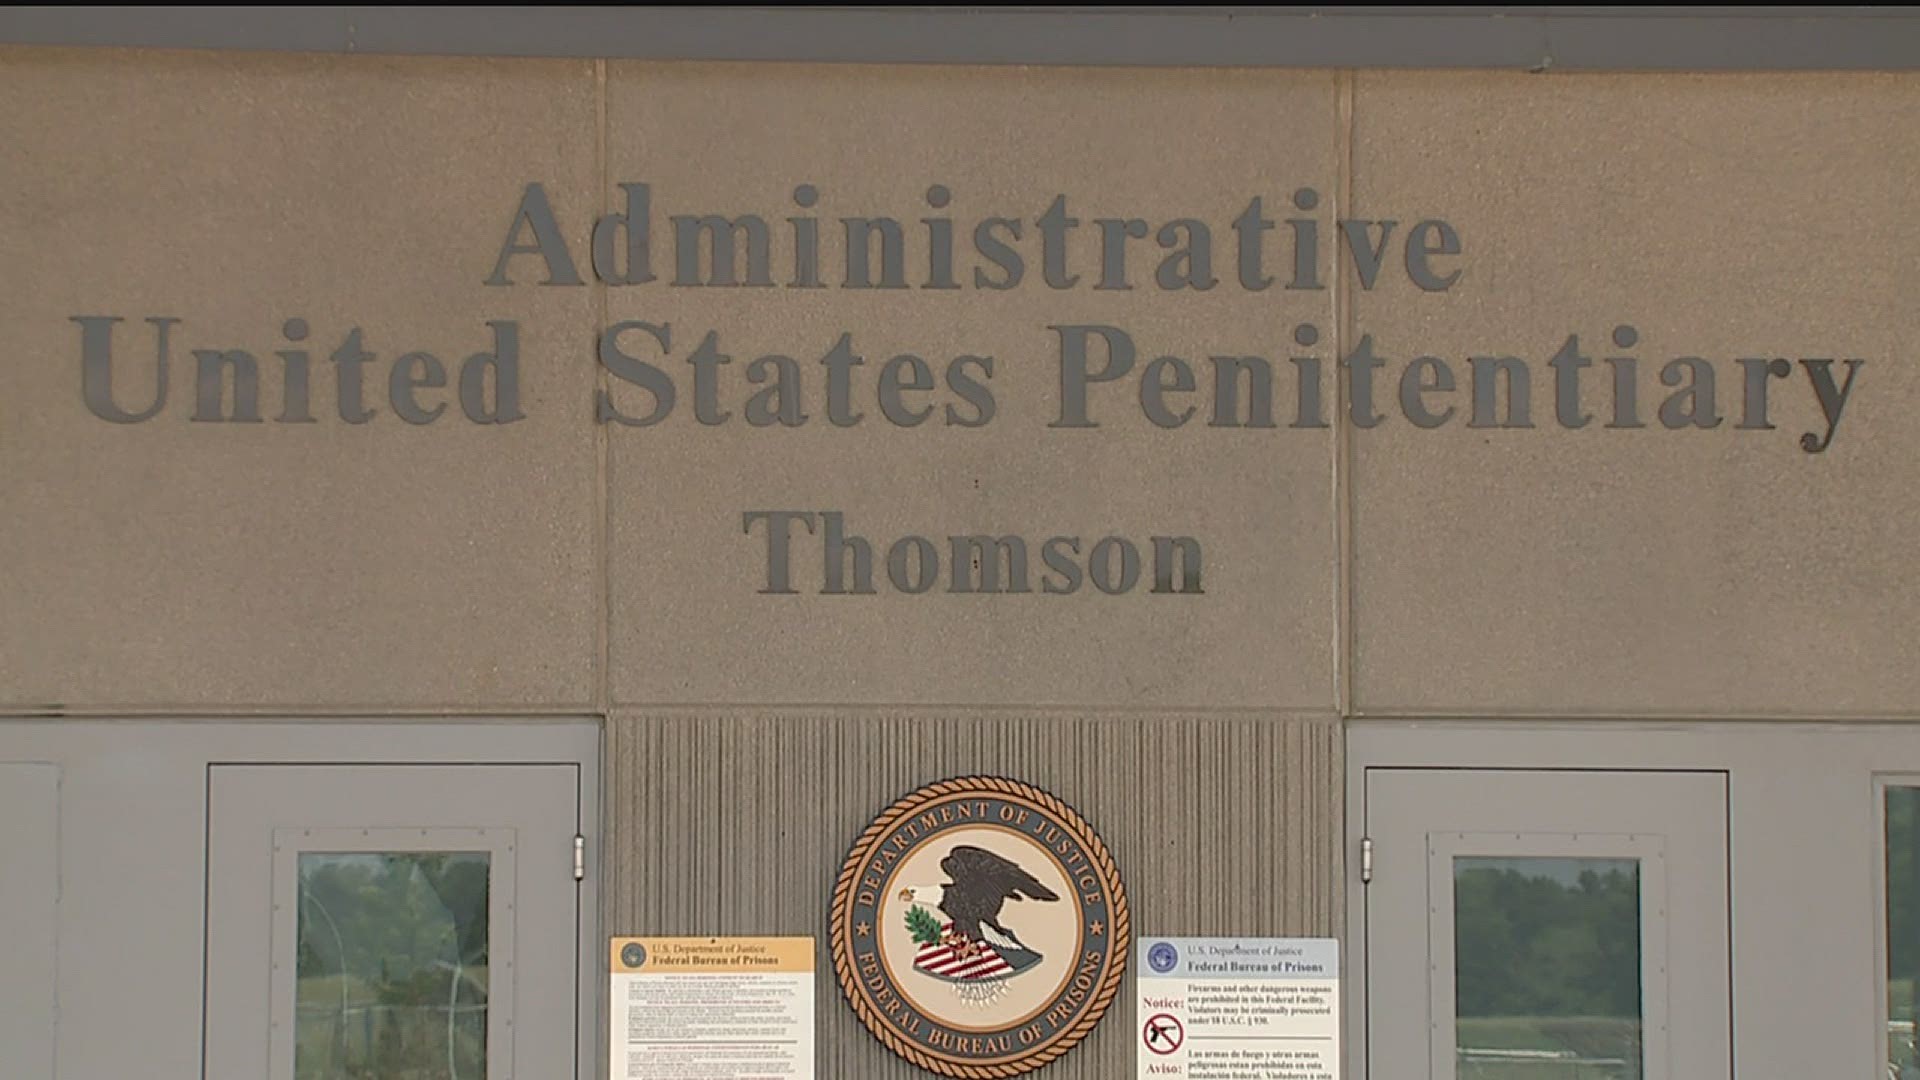 Inmates transferred to the prison are quarantined for 14 days, but lawmakers say tests are needed to protect staff and inmates.